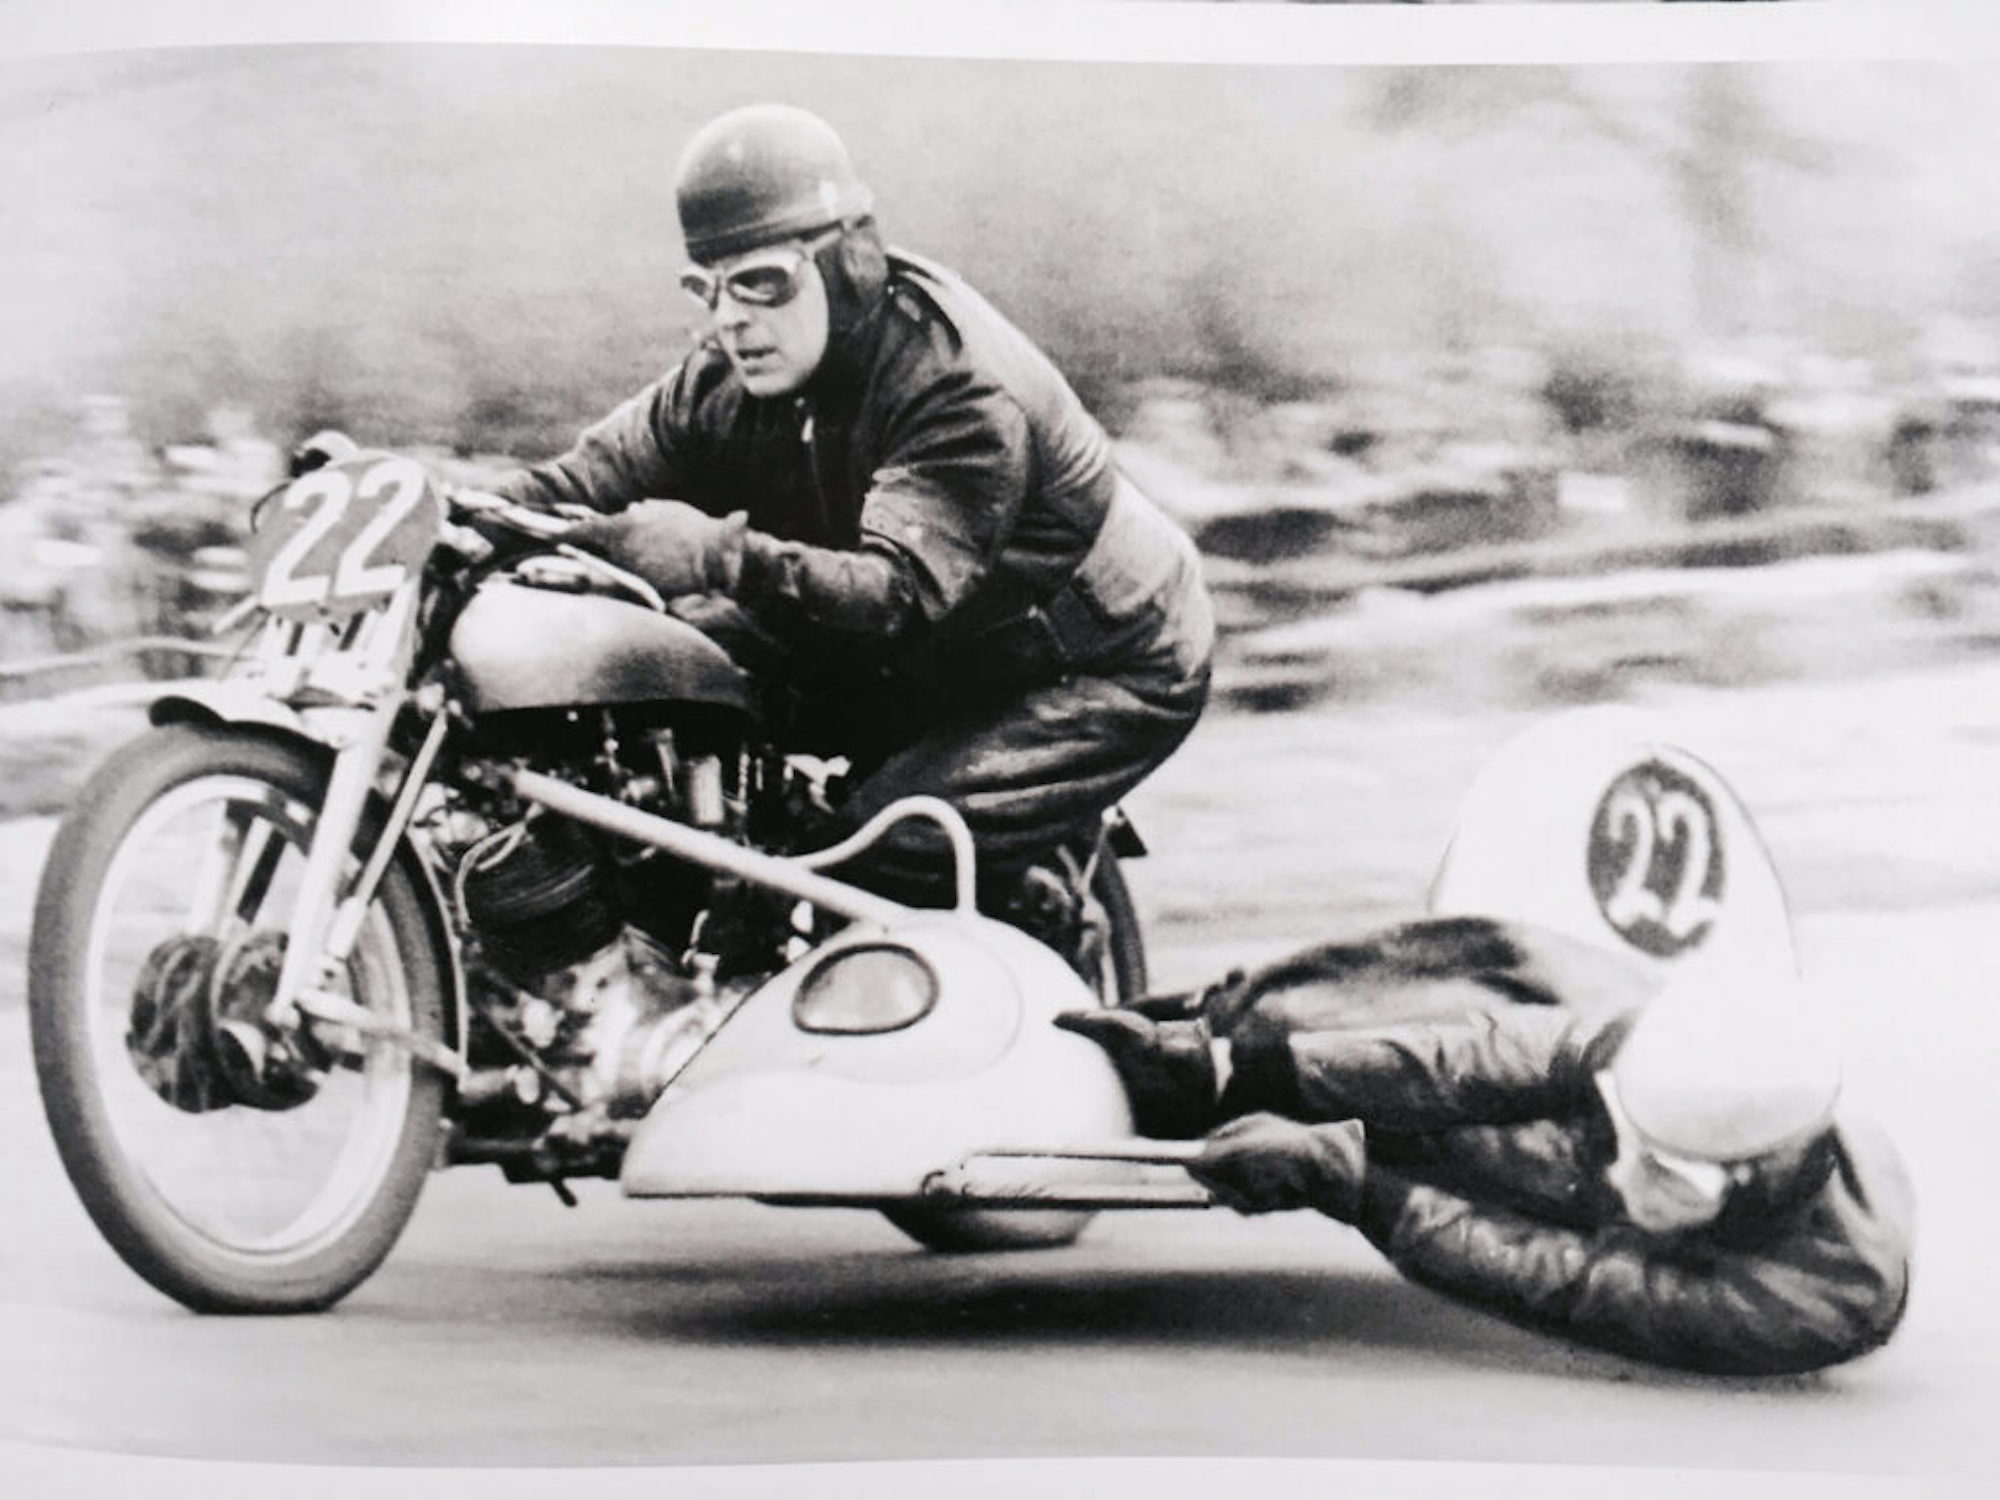 A Vincent bike being put theourhg her paces. Media sourced from the Vintagent.  